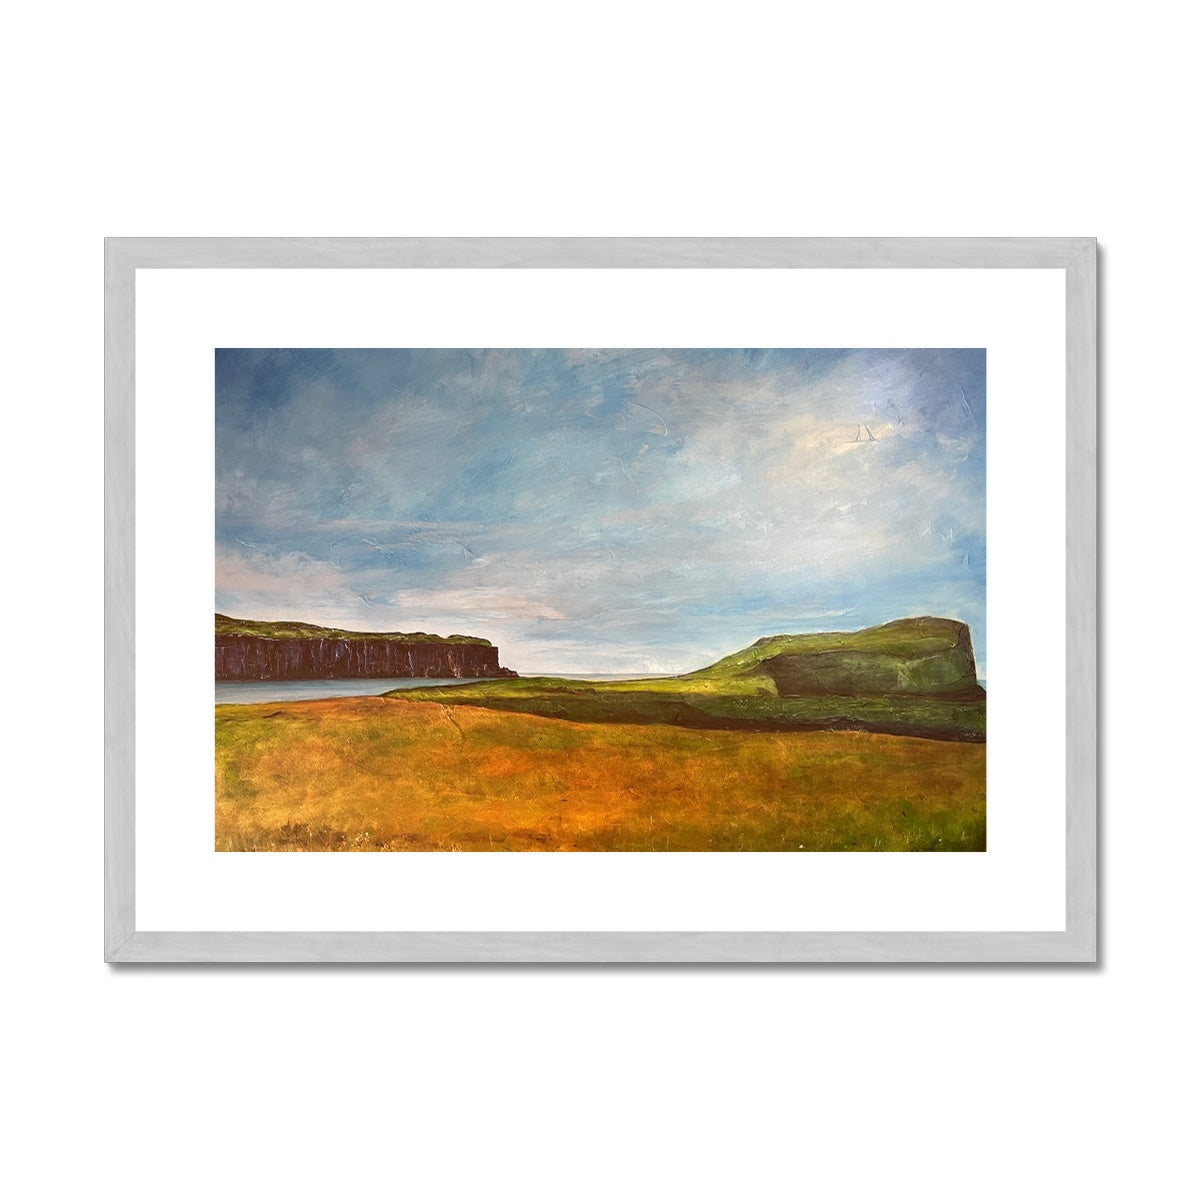 Approaching Oronsay Skye Painting | Antique Framed & Mounted Prints From Scotland-Antique Framed & Mounted Prints-Skye Art Gallery-A2 Landscape-Silver Frame-Paintings, Prints, Homeware, Art Gifts From Scotland By Scottish Artist Kevin Hunter